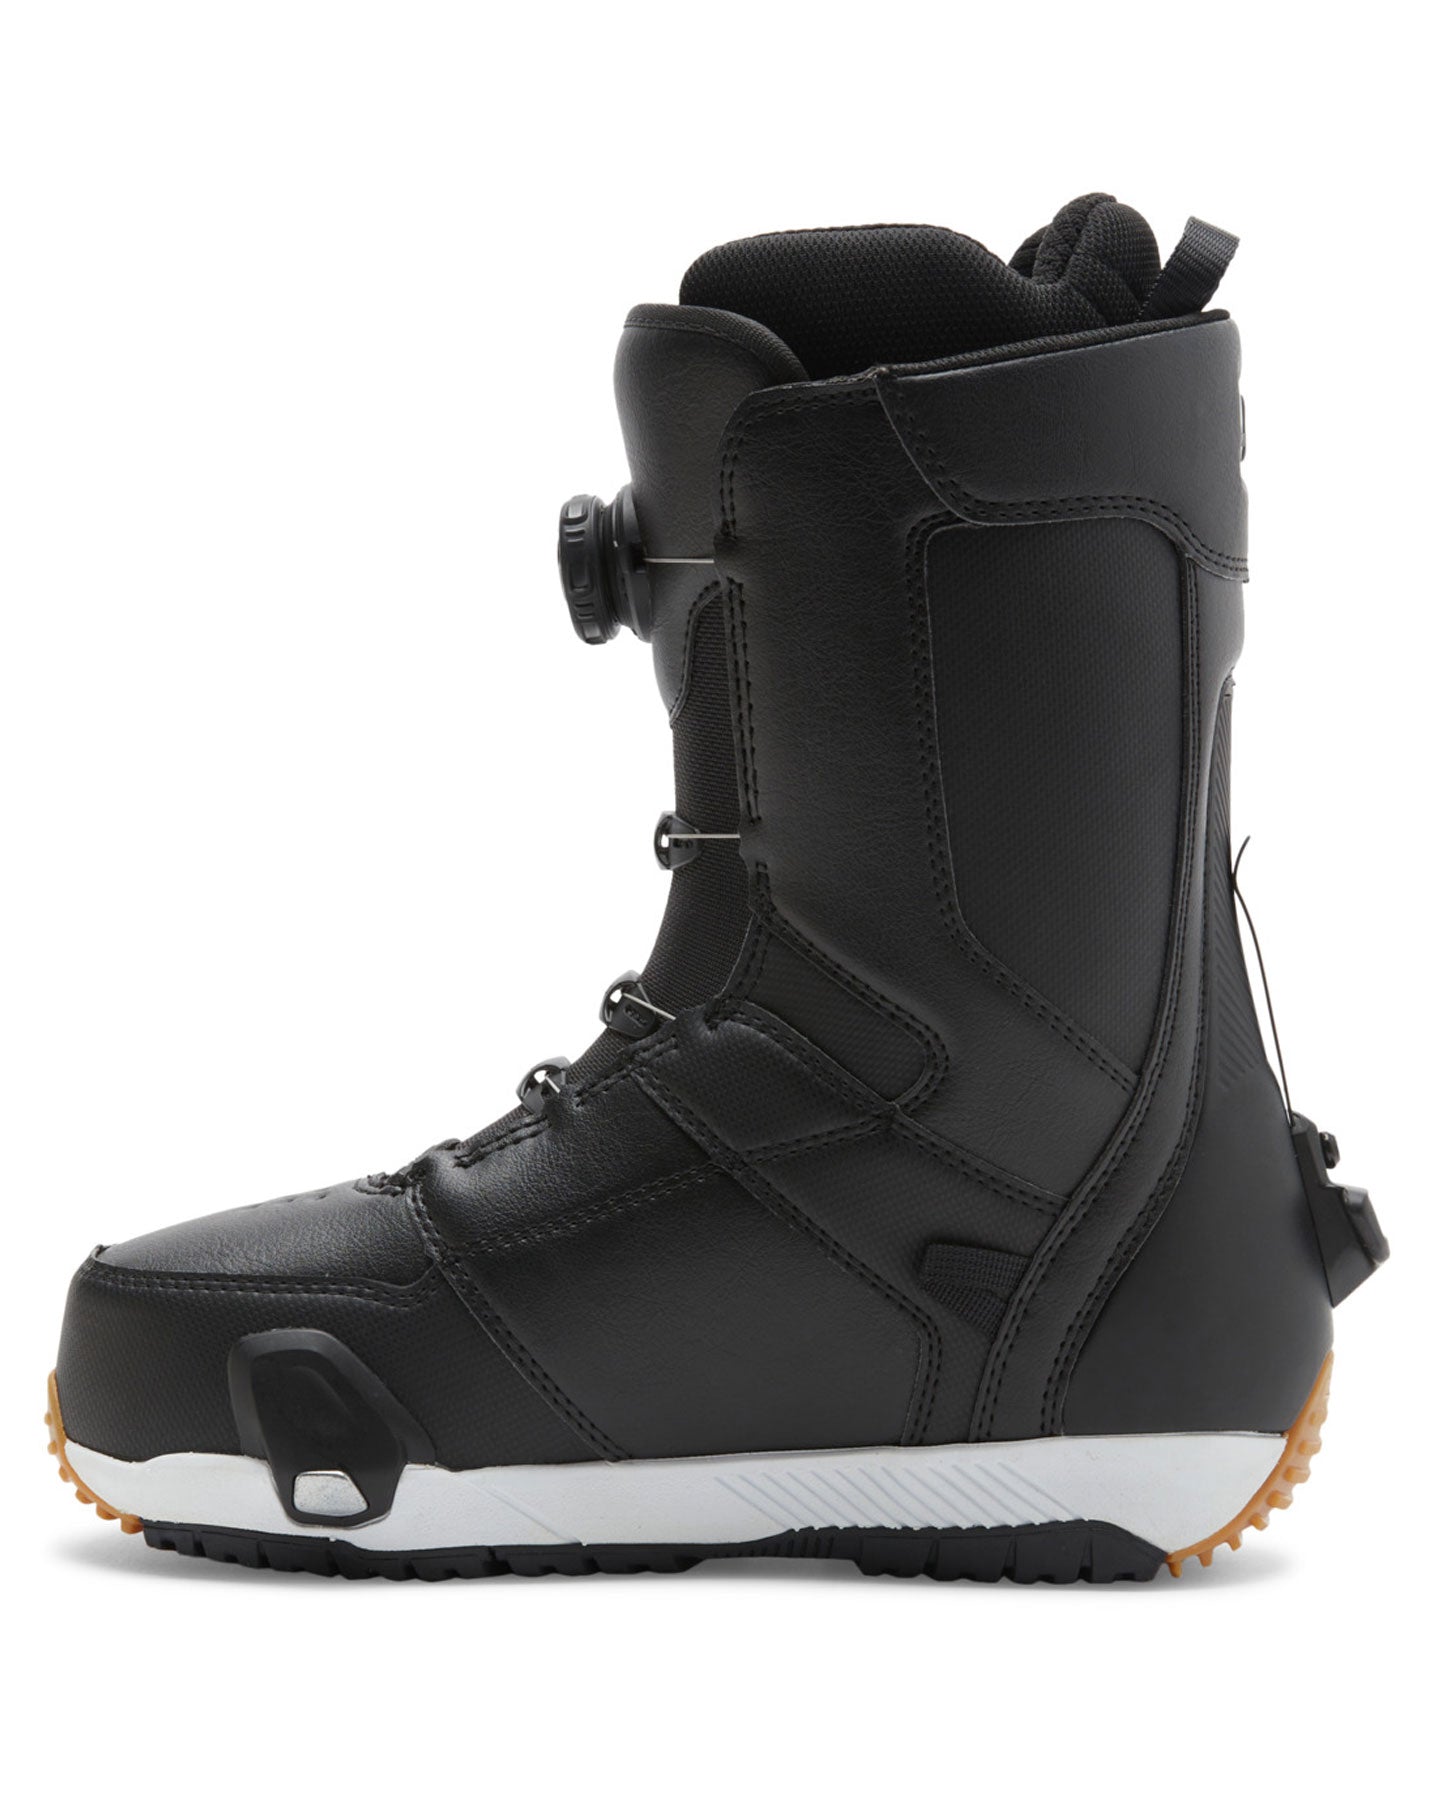 DC Men's Control Step On® Snowboard Boots - Black/White Men's Snowboard Boots - SnowSkiersWarehouse